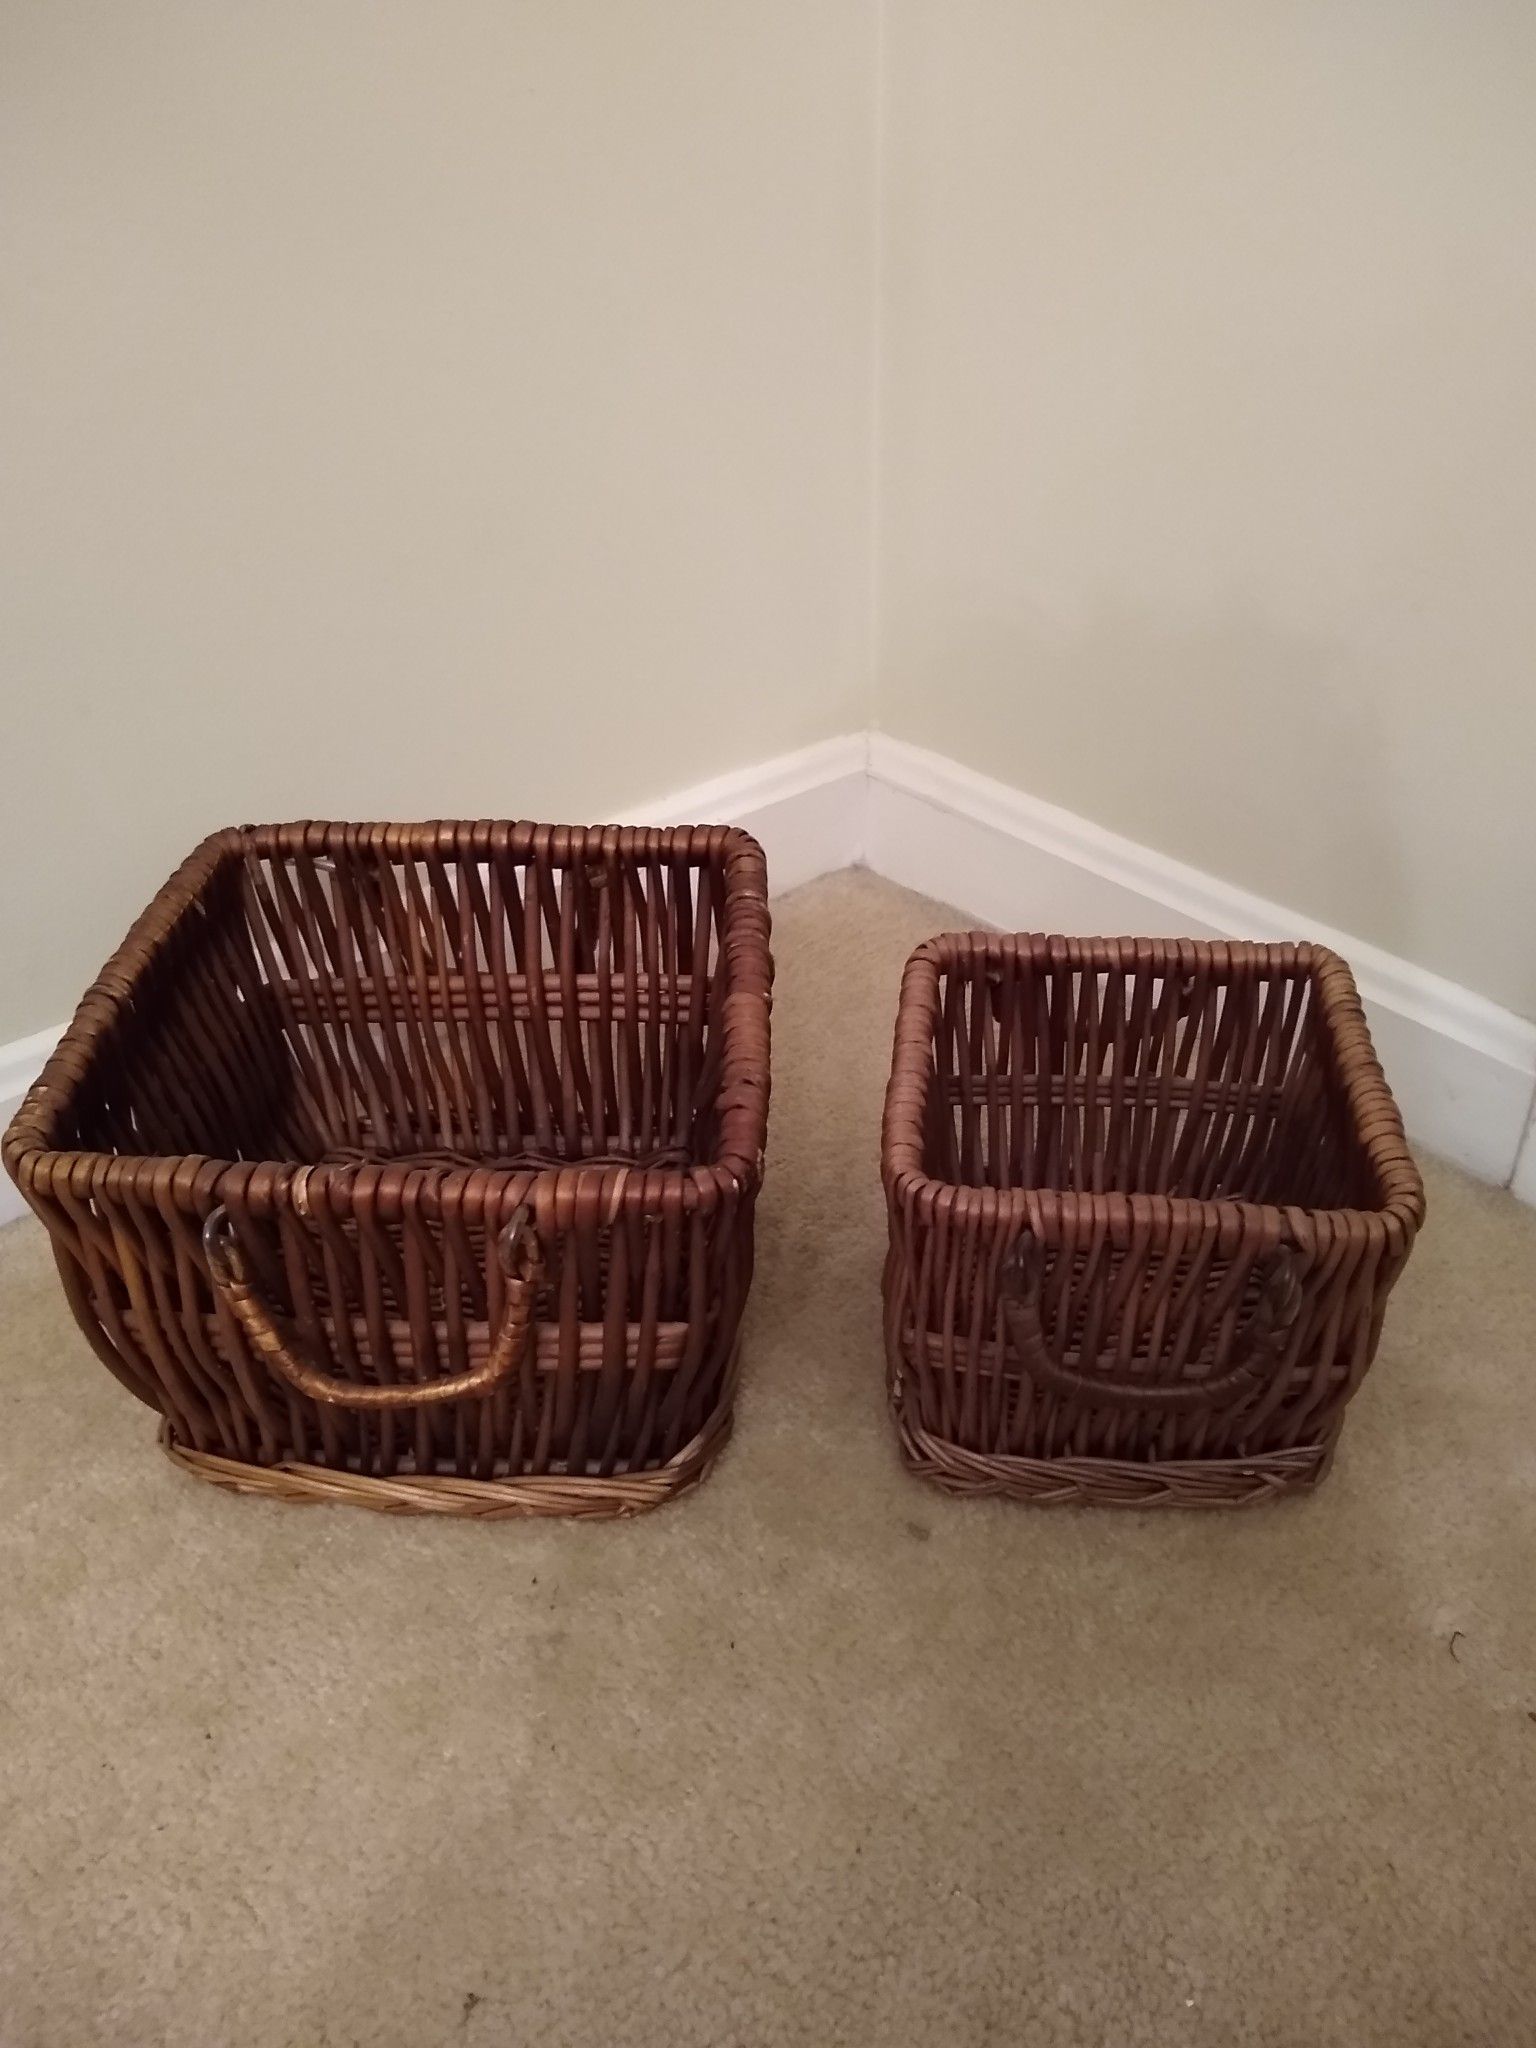 Pair matching baskets with handles